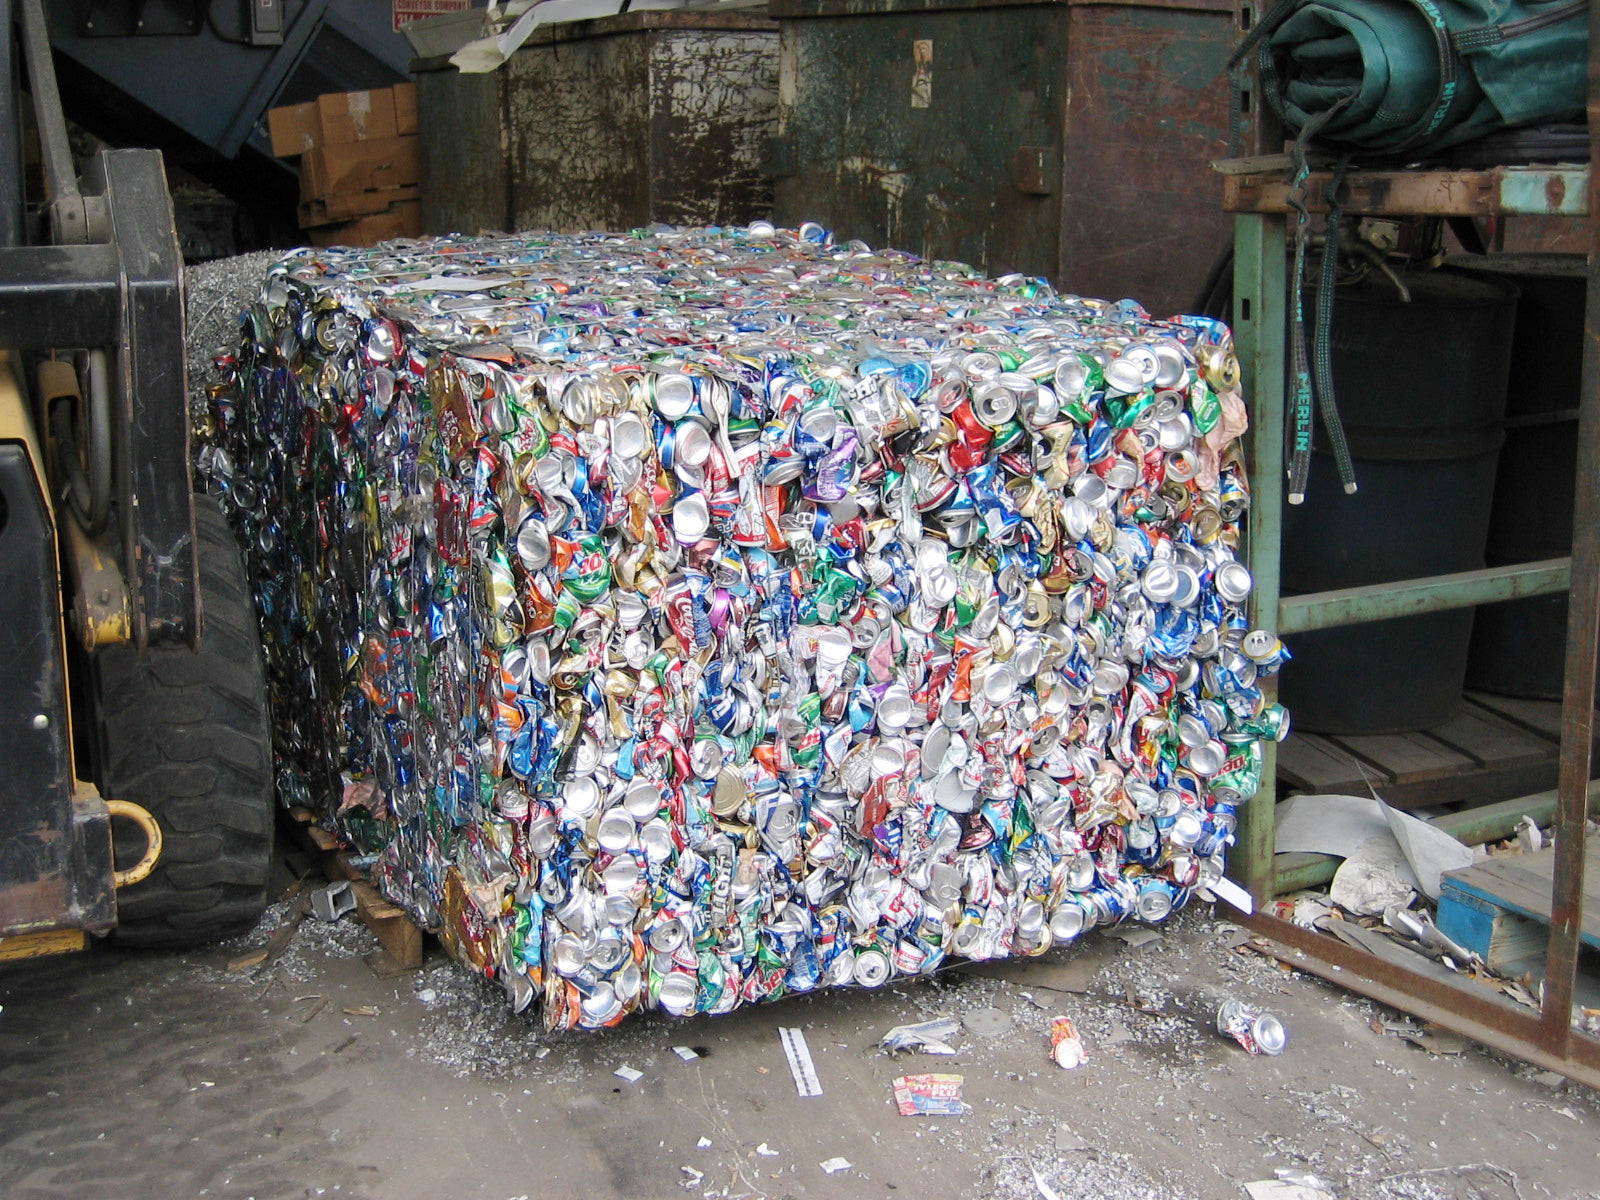 Aluminum cans waiting to be recycled in a bale